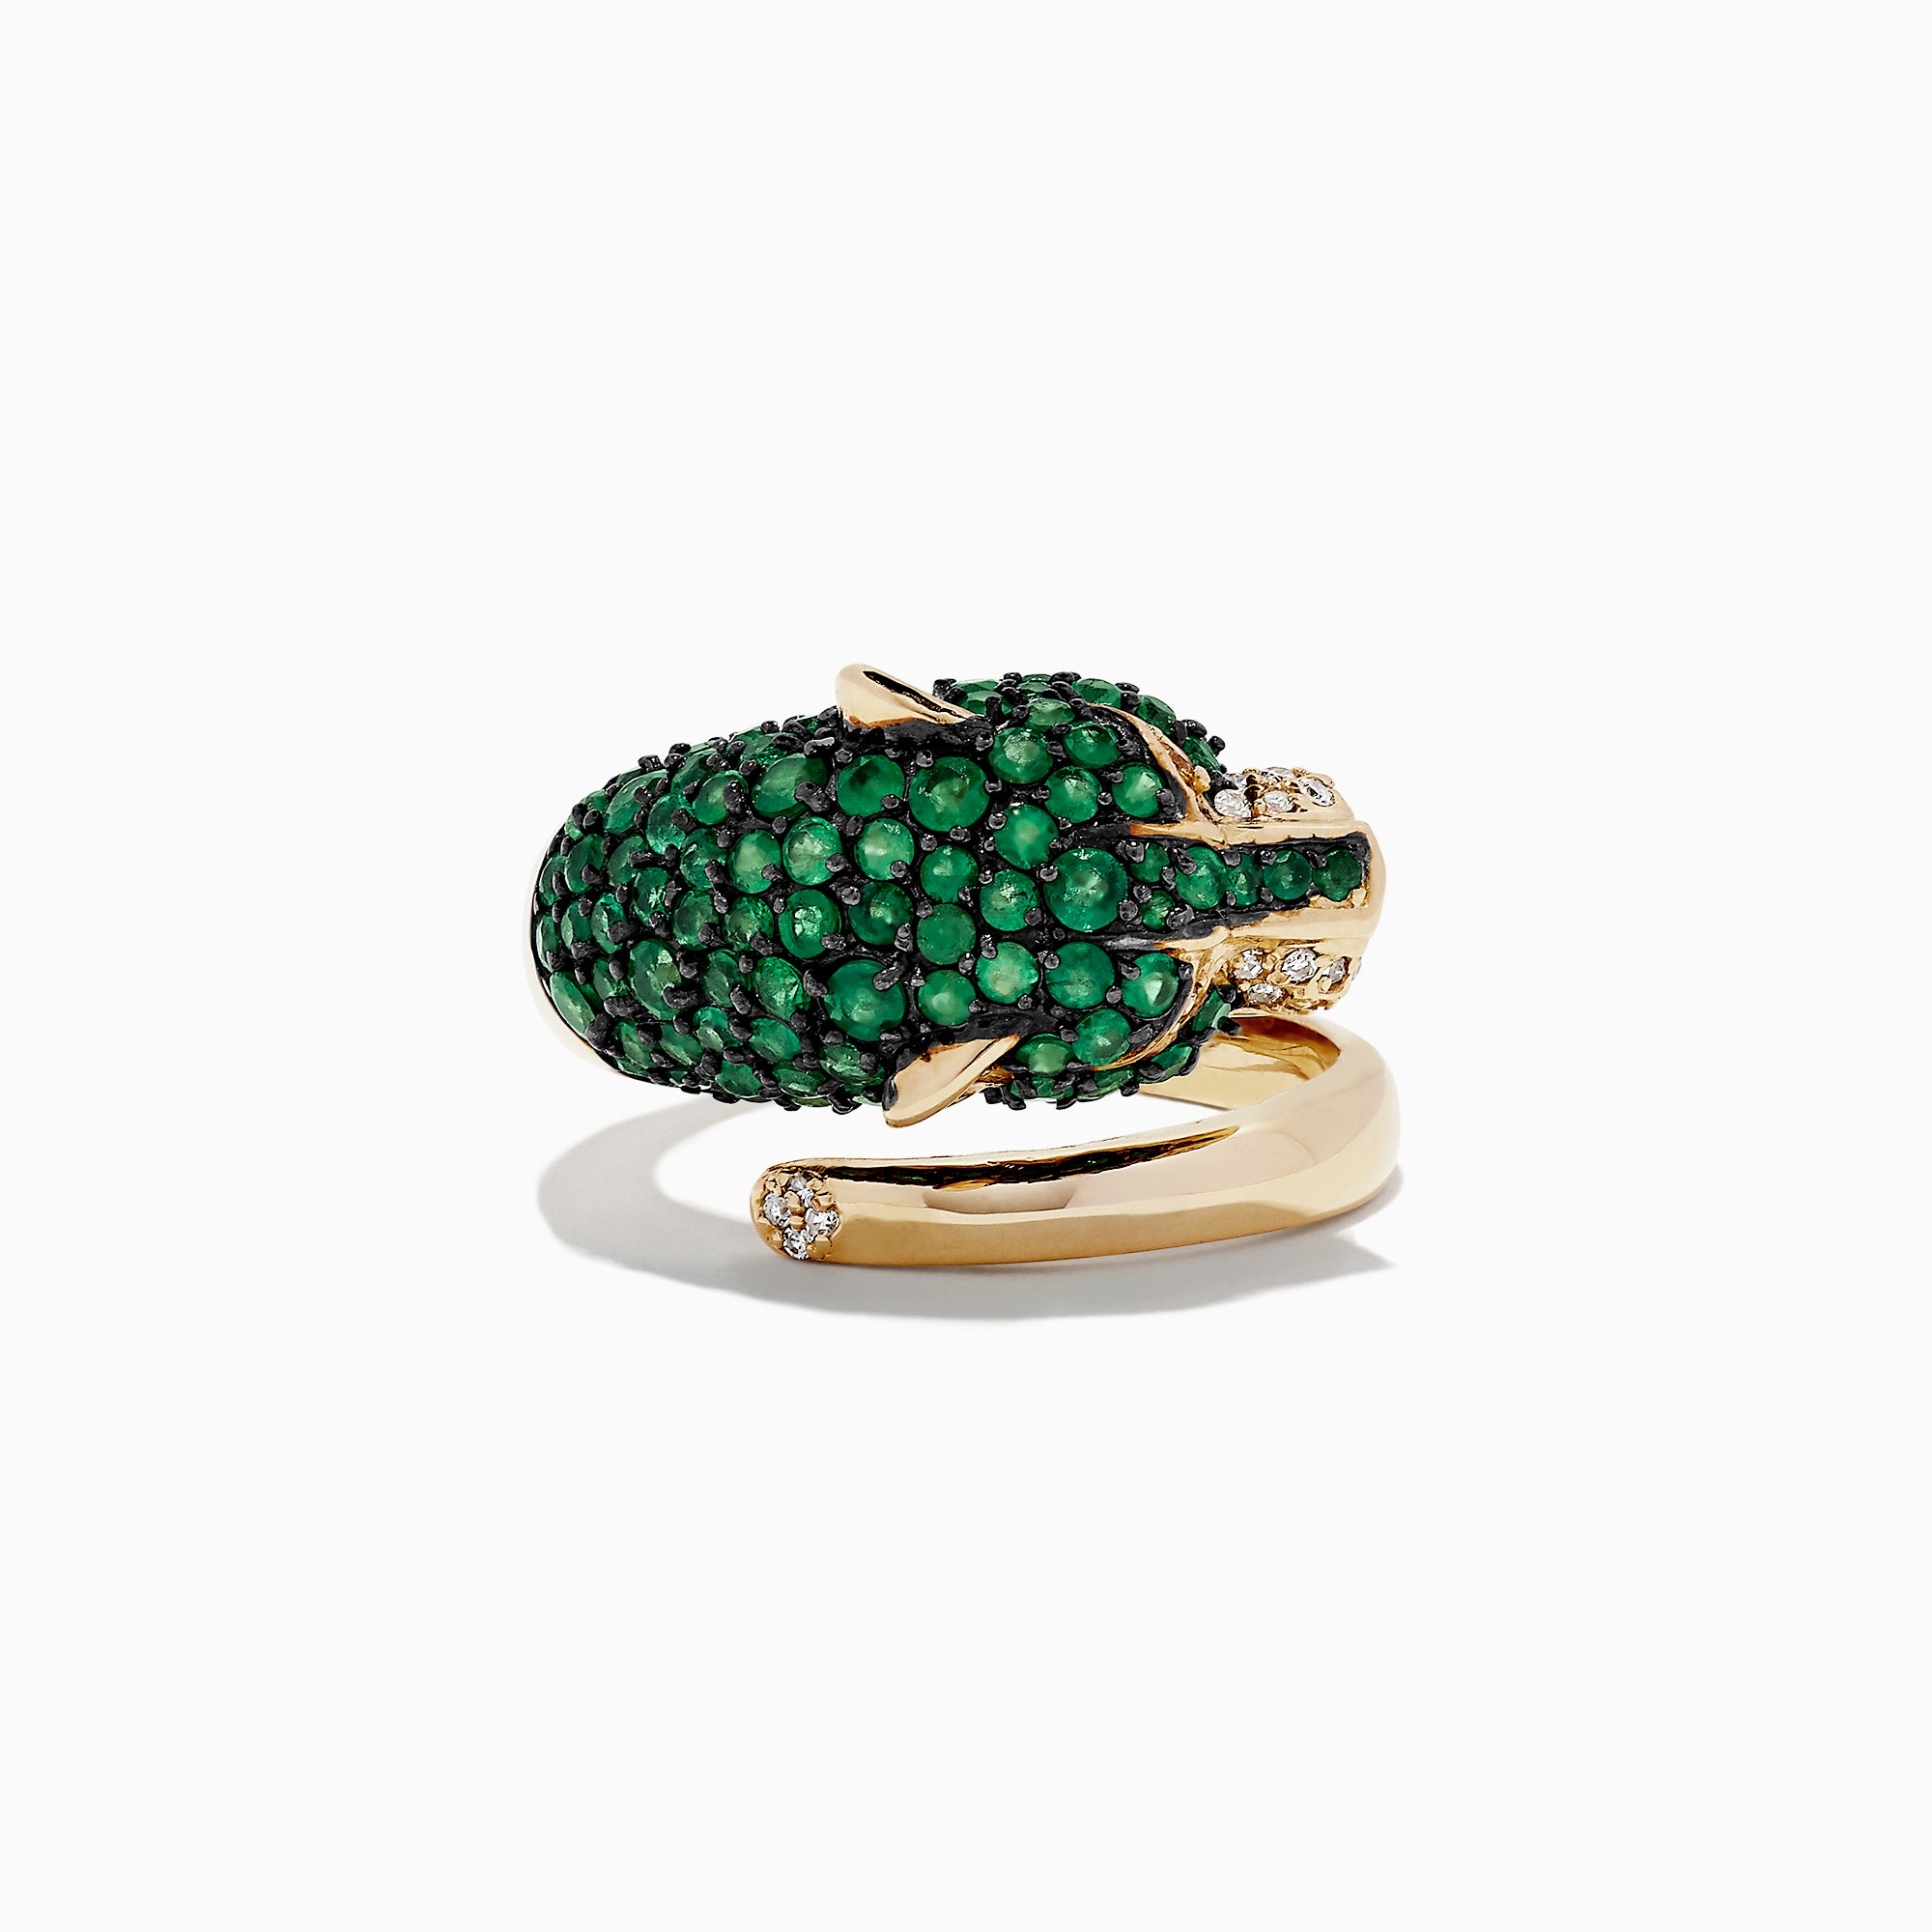 Effy Signature 14K Yellow Gold Emerald and Diamond Panther Ring, 2.48 TCW